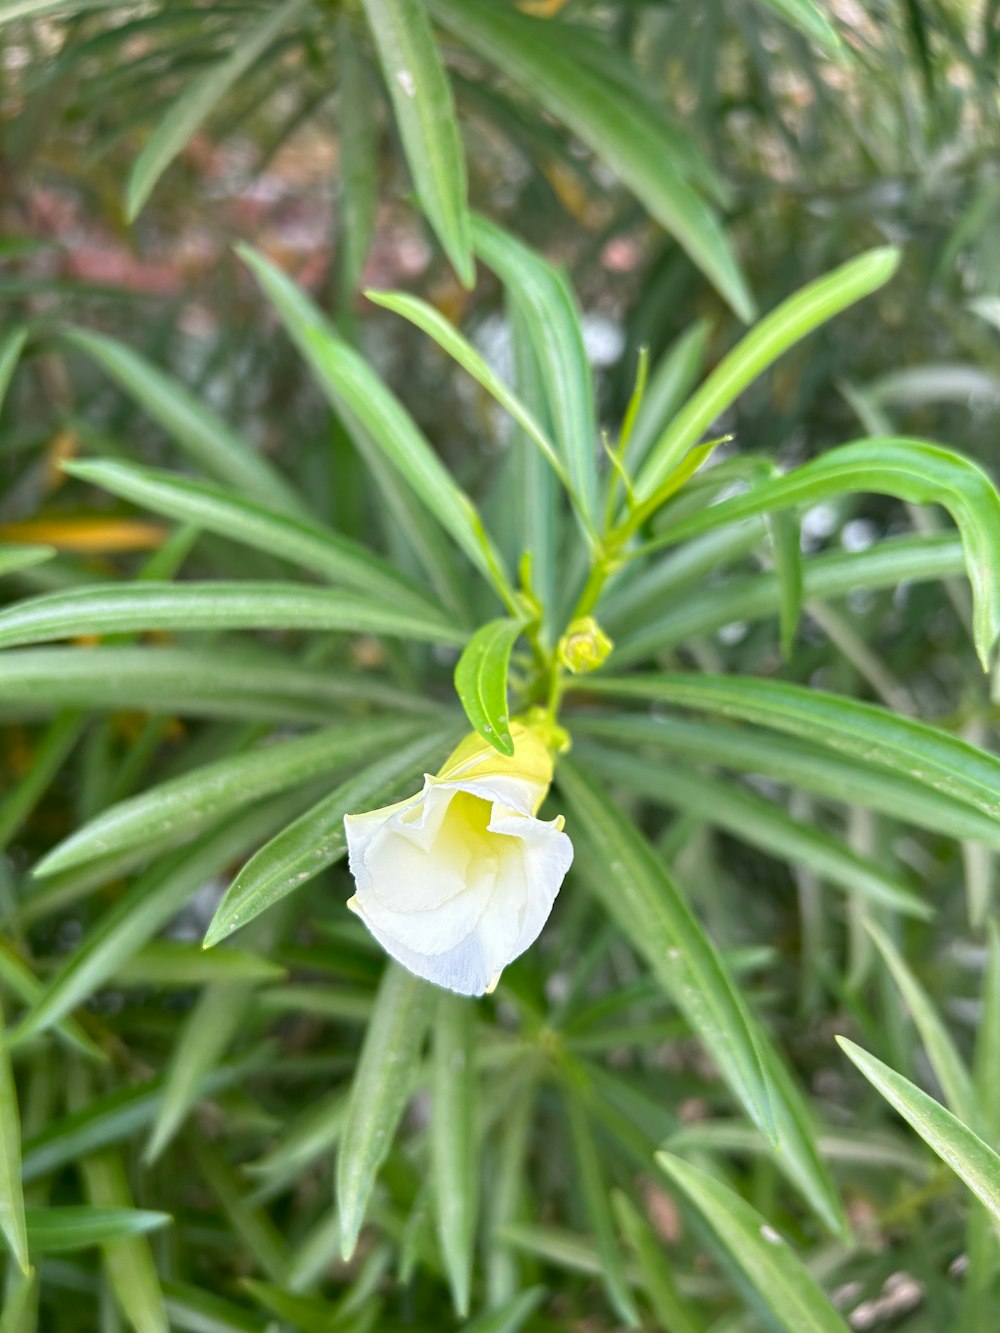 a white flower with a yellow center on a plant